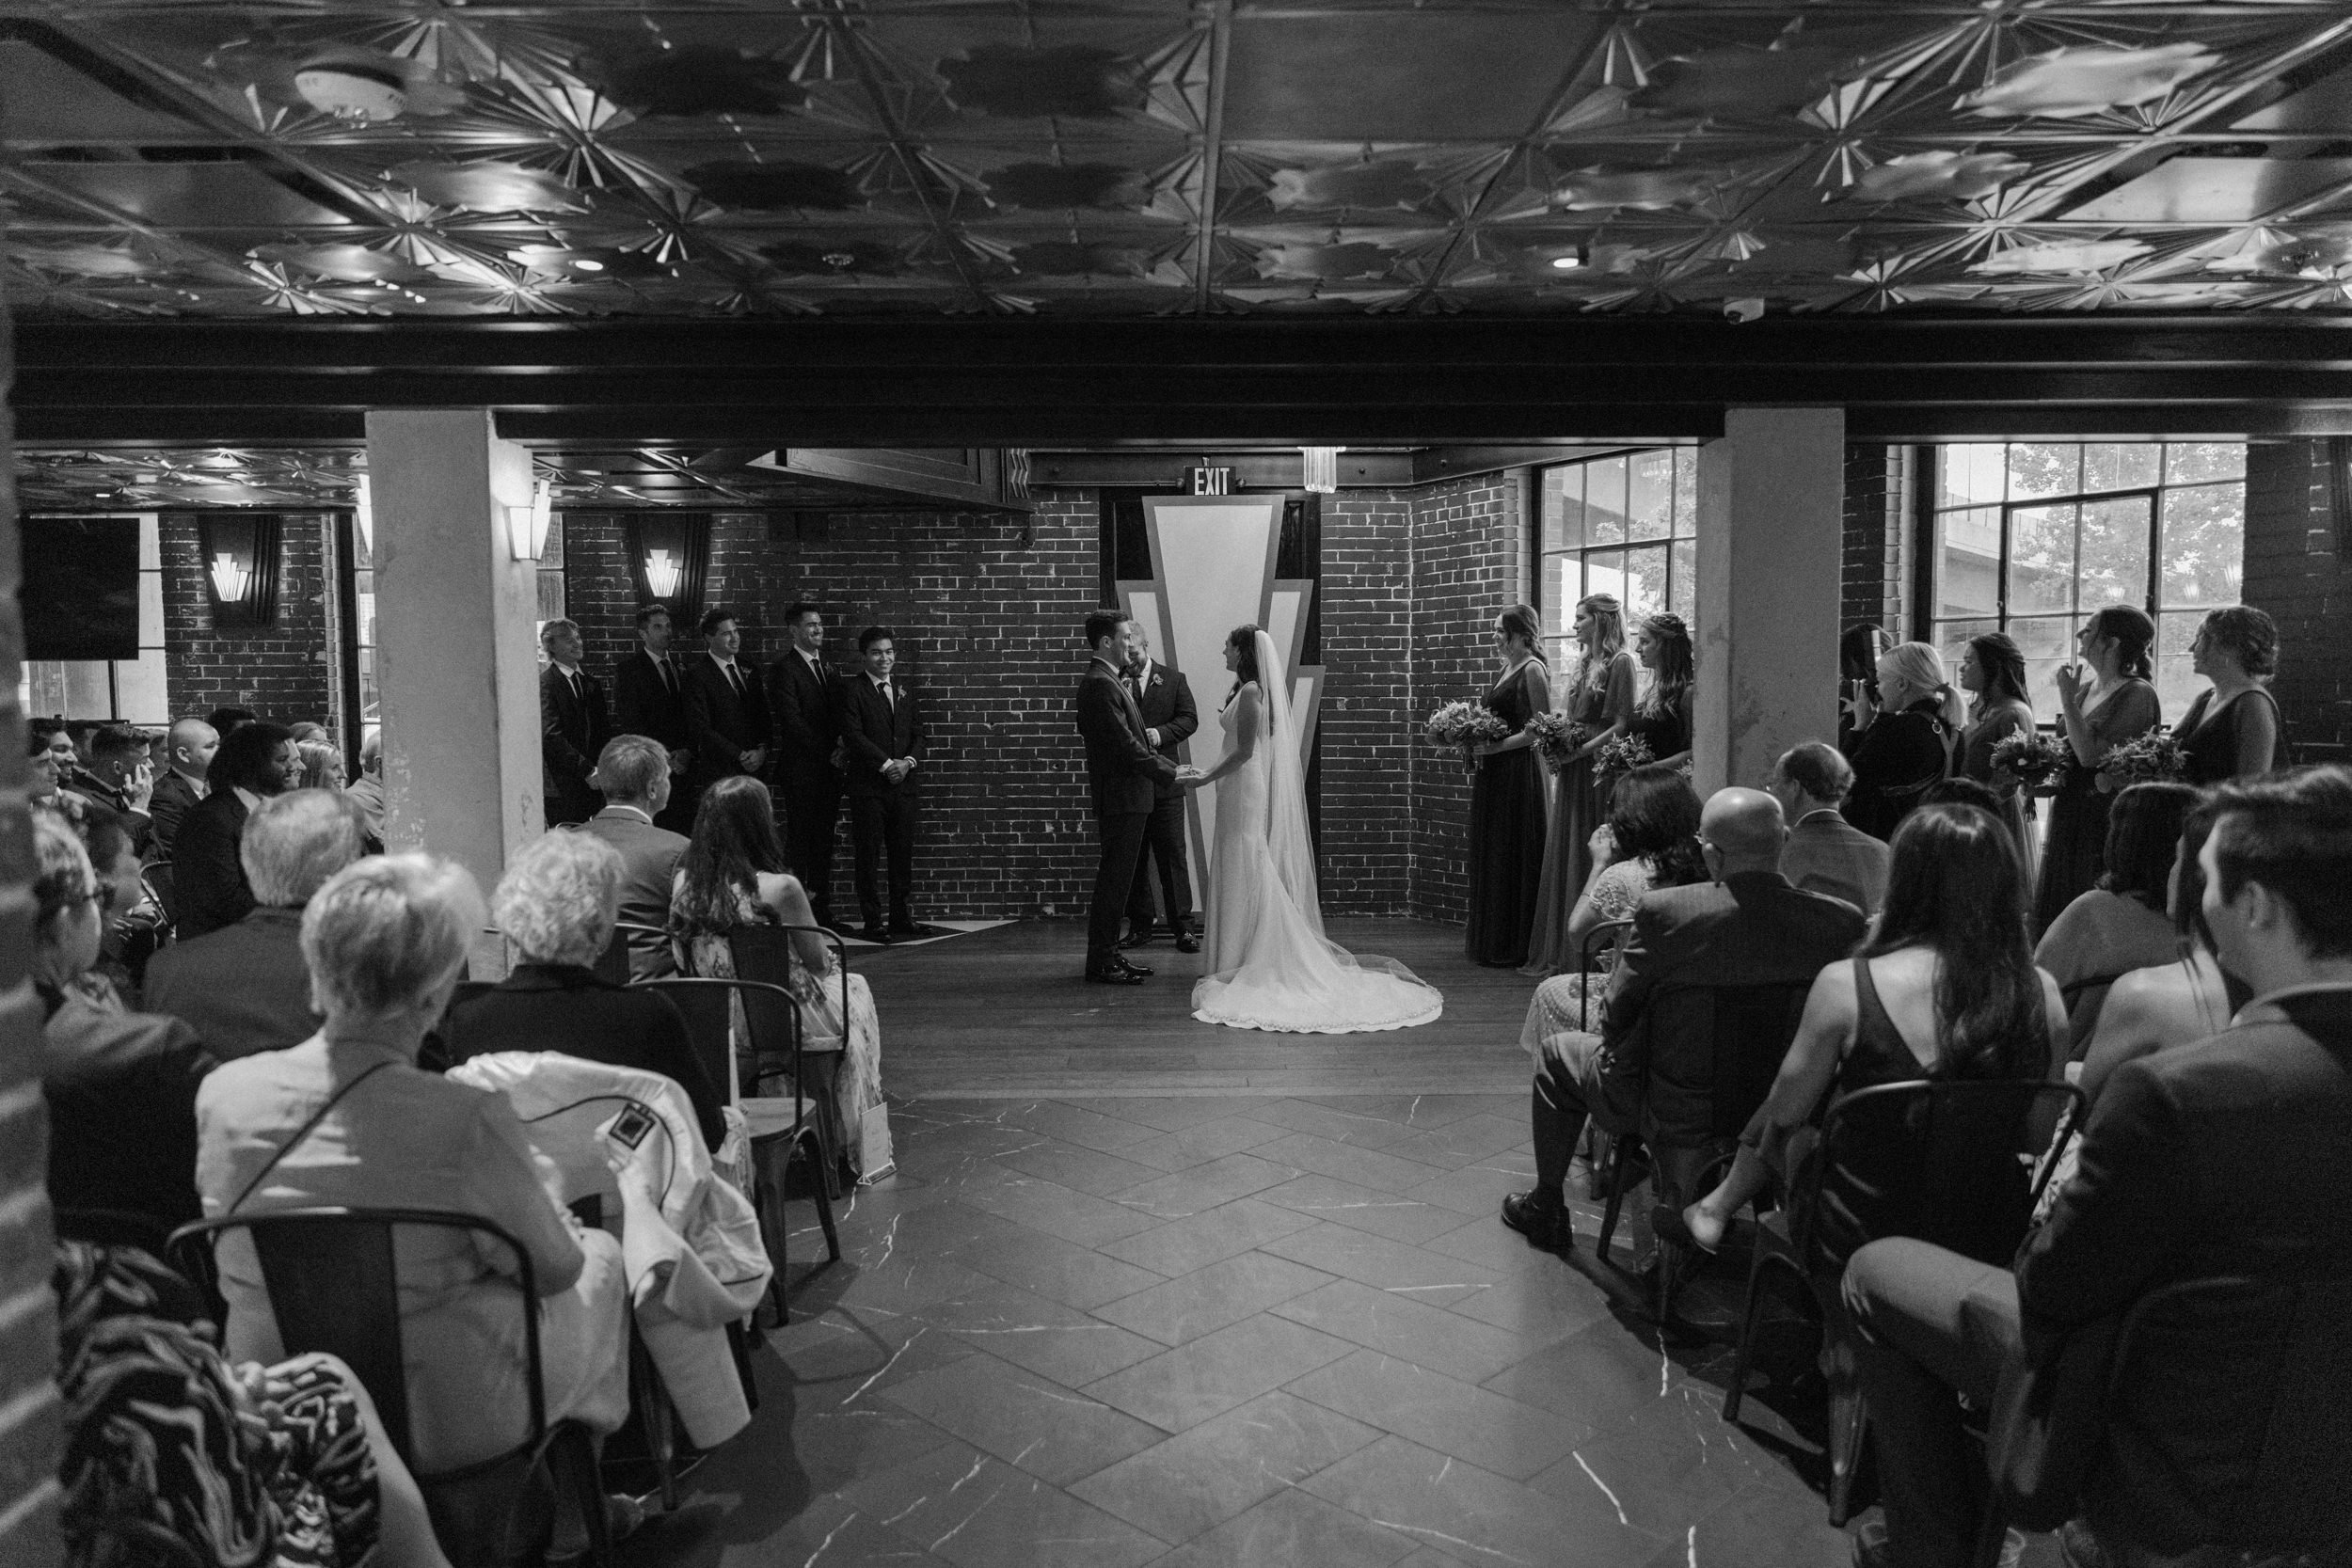 Guests watch the ceremony at Ironworks in Denver, CO